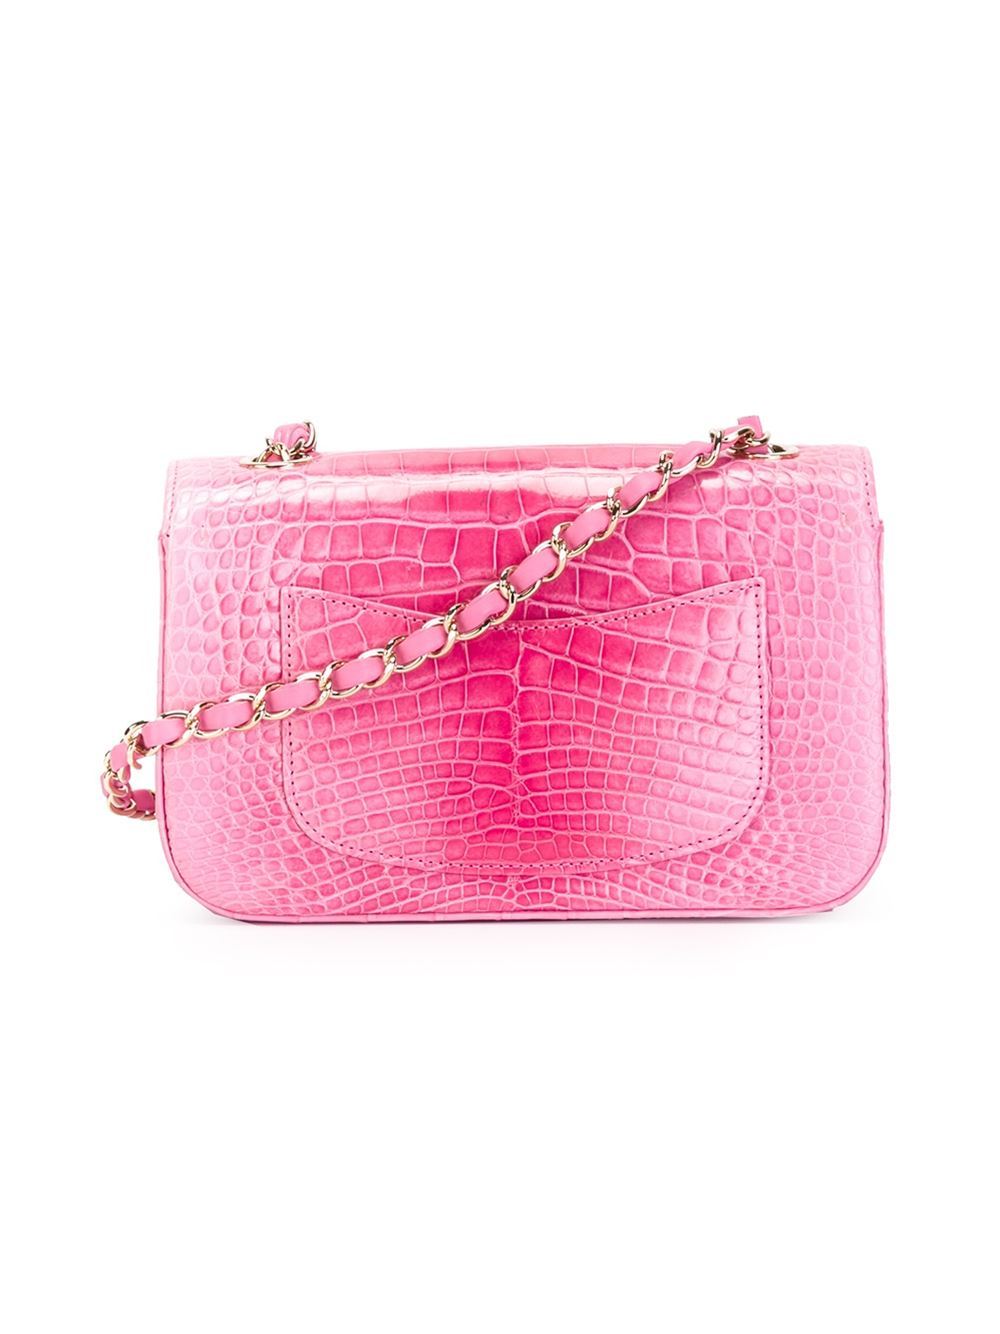 This pink crocodile leather embossed flap crossbody bag from Chanel features a fold-over top with twist-lock closure, a gold-tone logo plaque, a chain and leather strap, a back slip pocket, an internal zipped pocket, an internal slip pocket and an